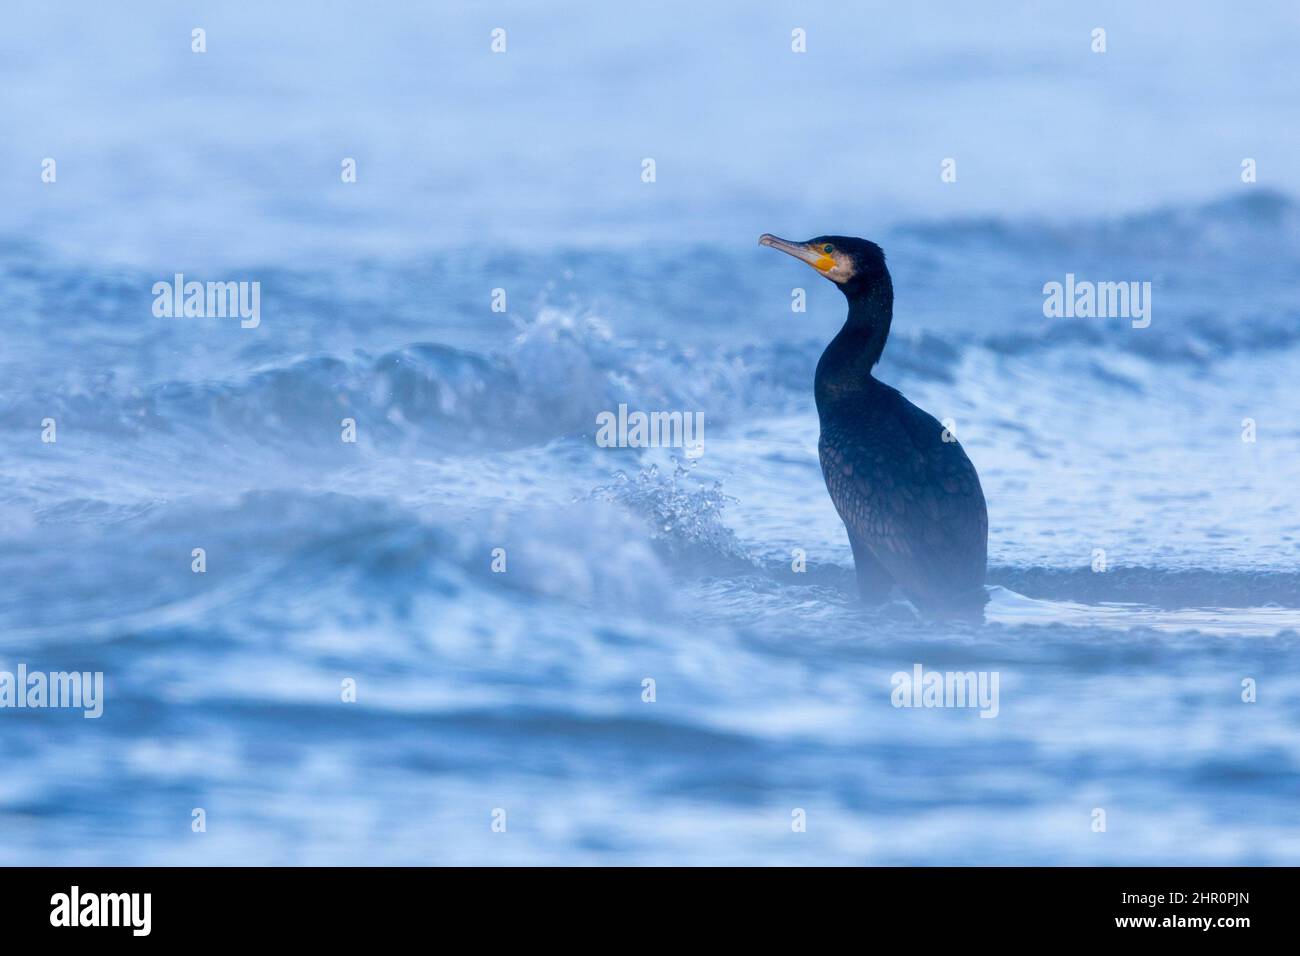 Great Cormorant (Phalacrocorax carbo sinensis), adult standing among the waves, Campania, Italy Stock Photo